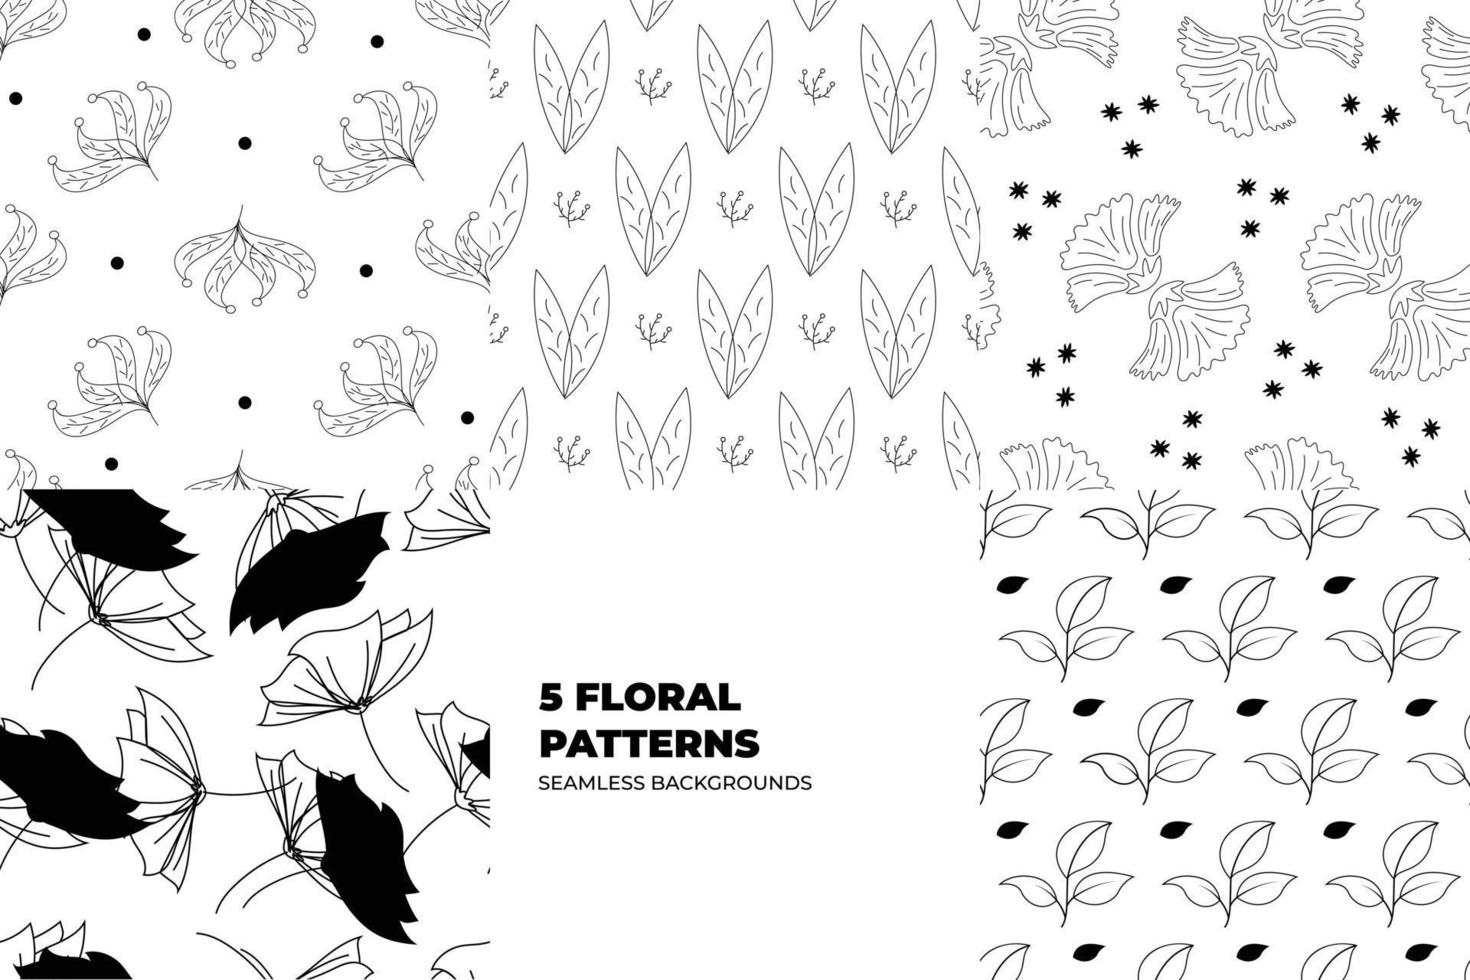 Floral seamless patterns. Leaves and flowers in black and white tones. Repeating vector design for paper, cover, fabric, interior decor and textile users. Vector illustration.